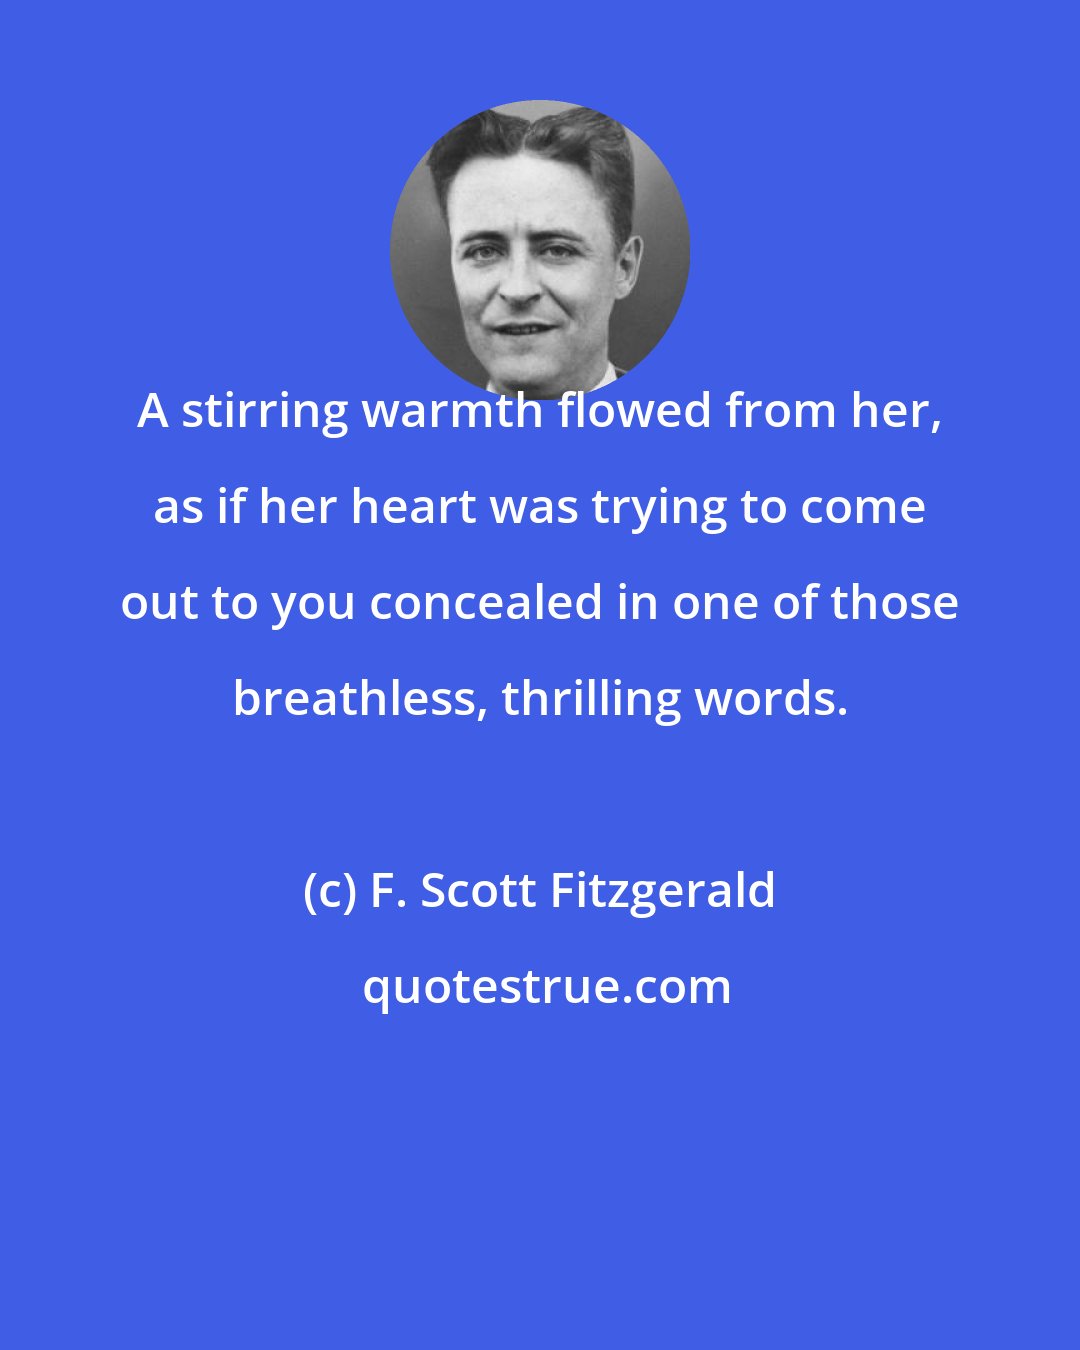 F. Scott Fitzgerald: A stirring warmth flowed from her, as if her heart was trying to come out to you concealed in one of those breathless, thrilling words.